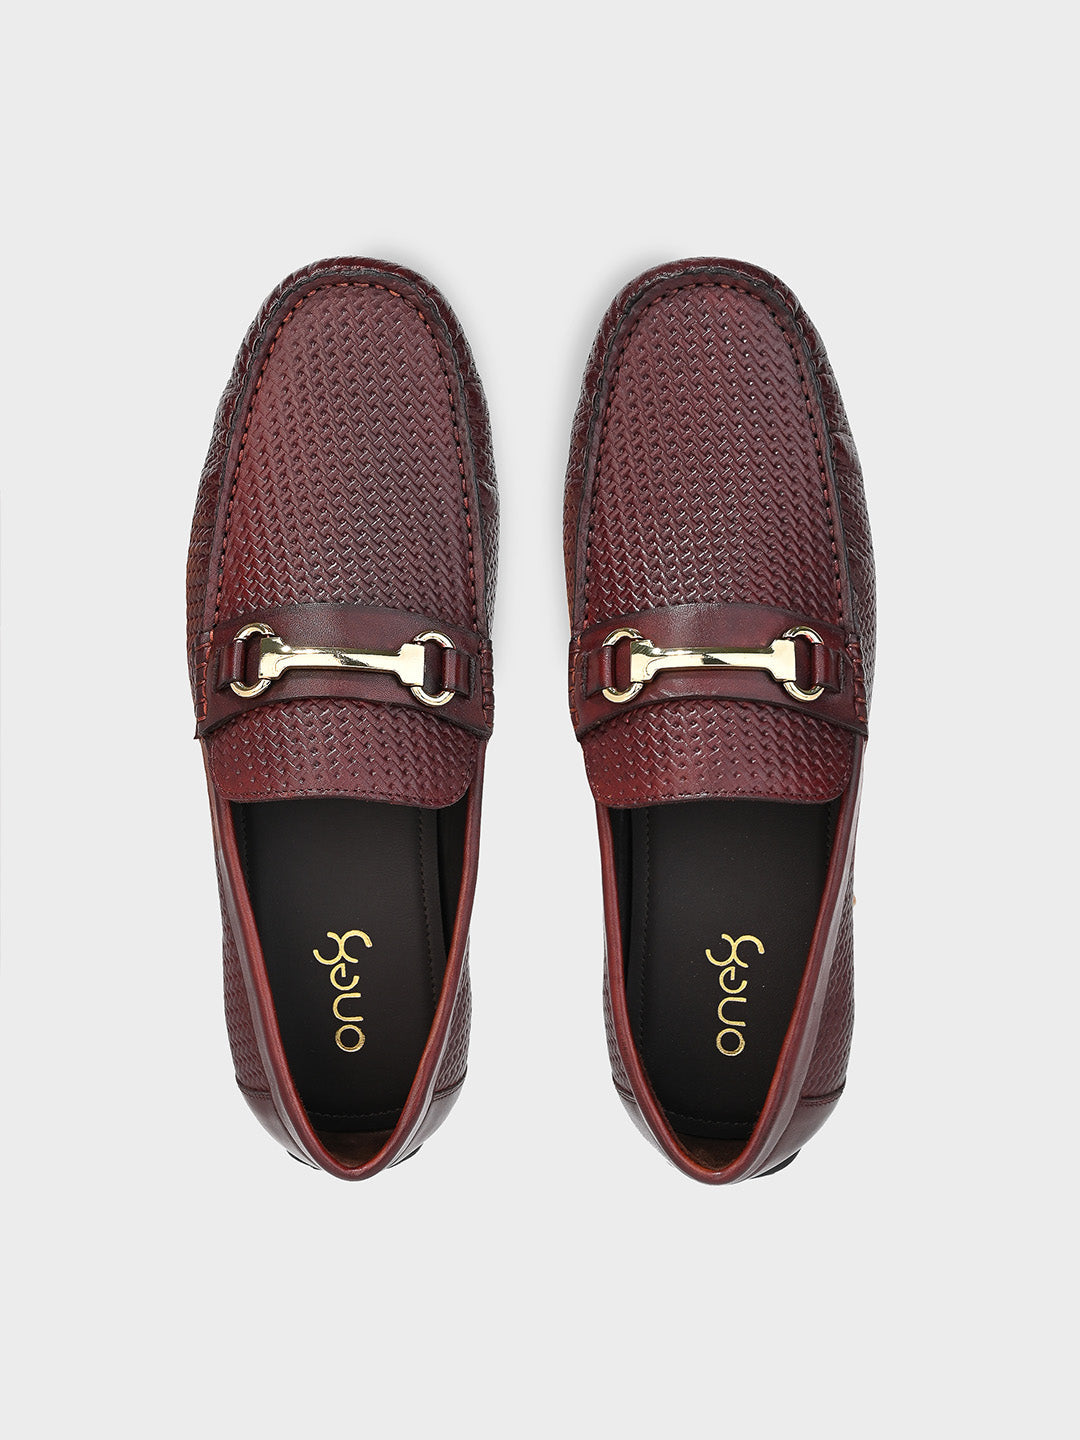 Men's Brown Leather Slip-On Loafers